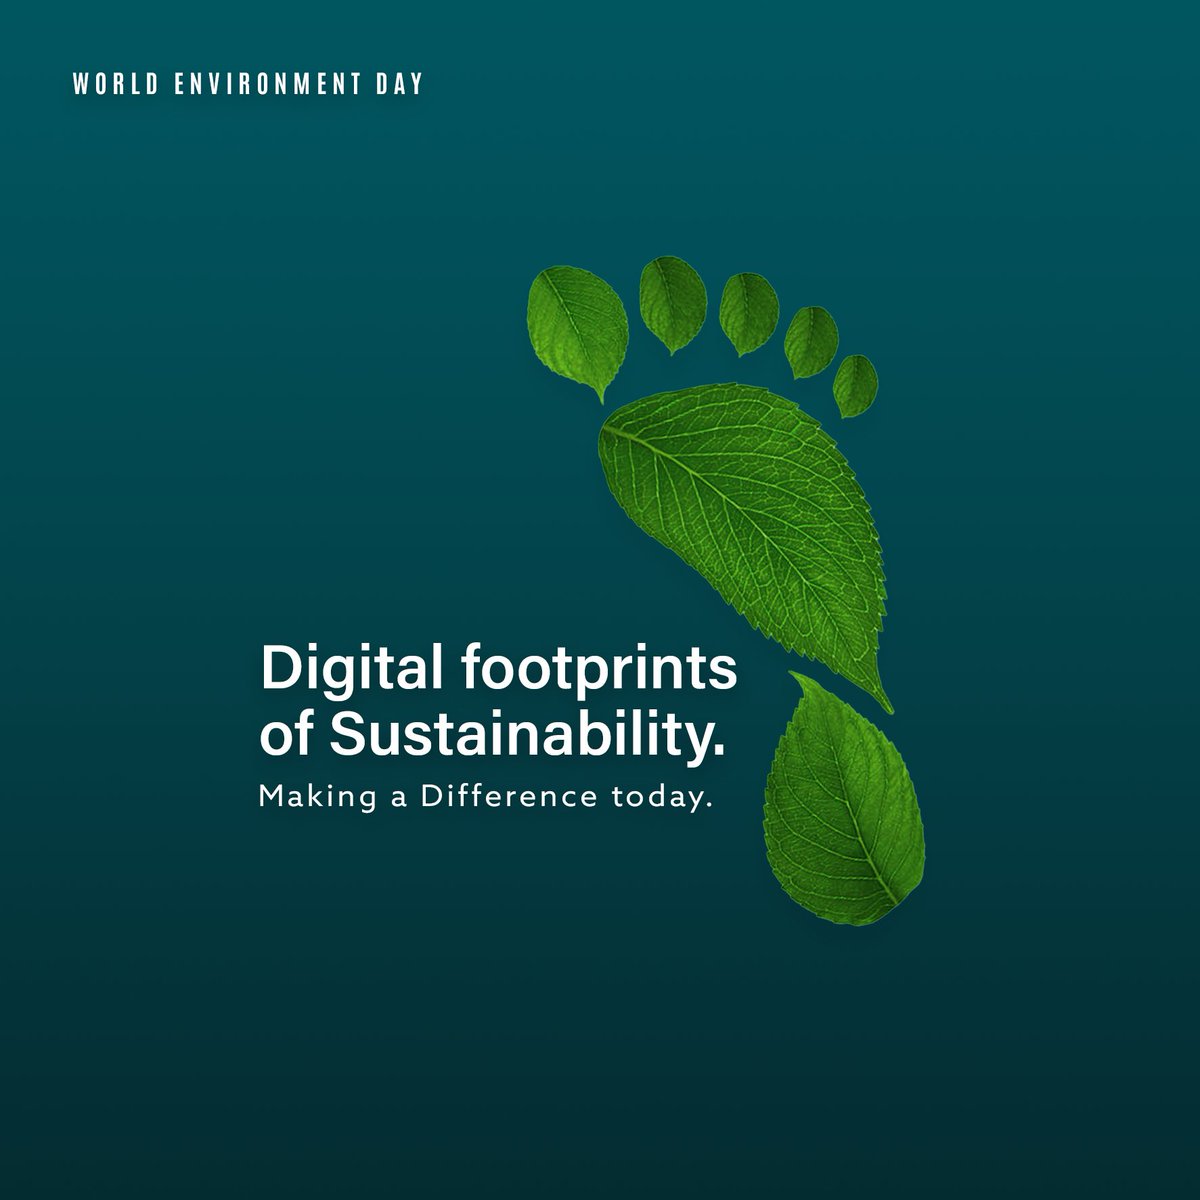 Leave a digital footprint of sustainability and make a difference today! Together, we can create a brighter future for our planet.  
#SustainableLiving #DigitalFootprints

To obtain additional details at rfr.bz/t5s2yfp